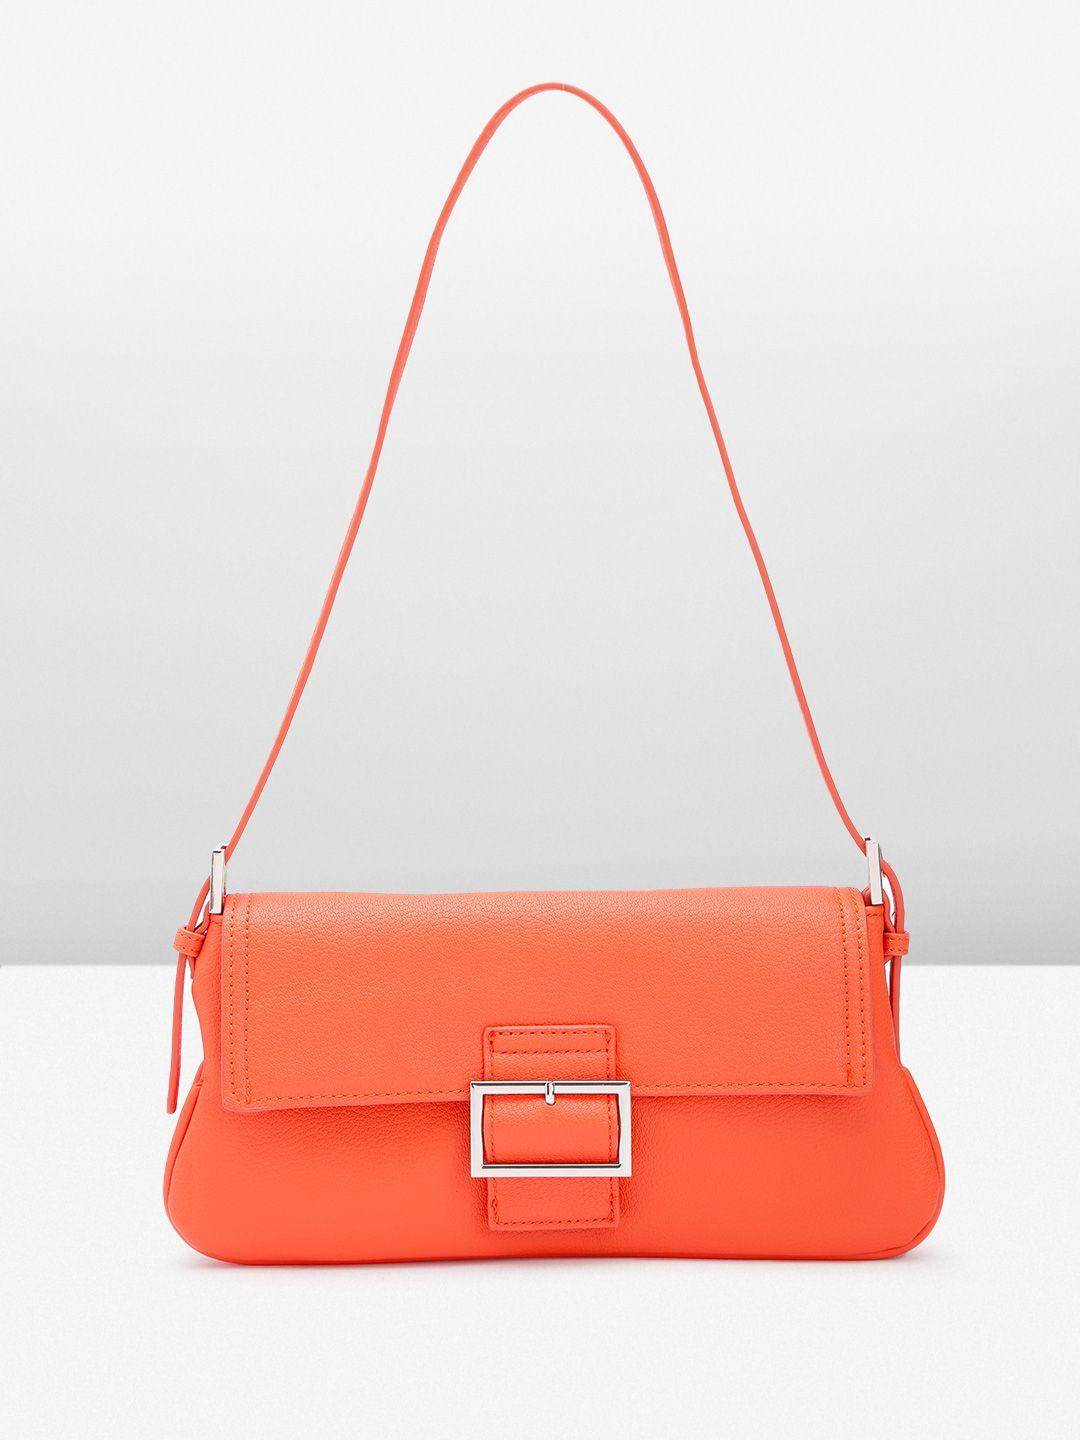 mango structured baguette bag with buckle detail